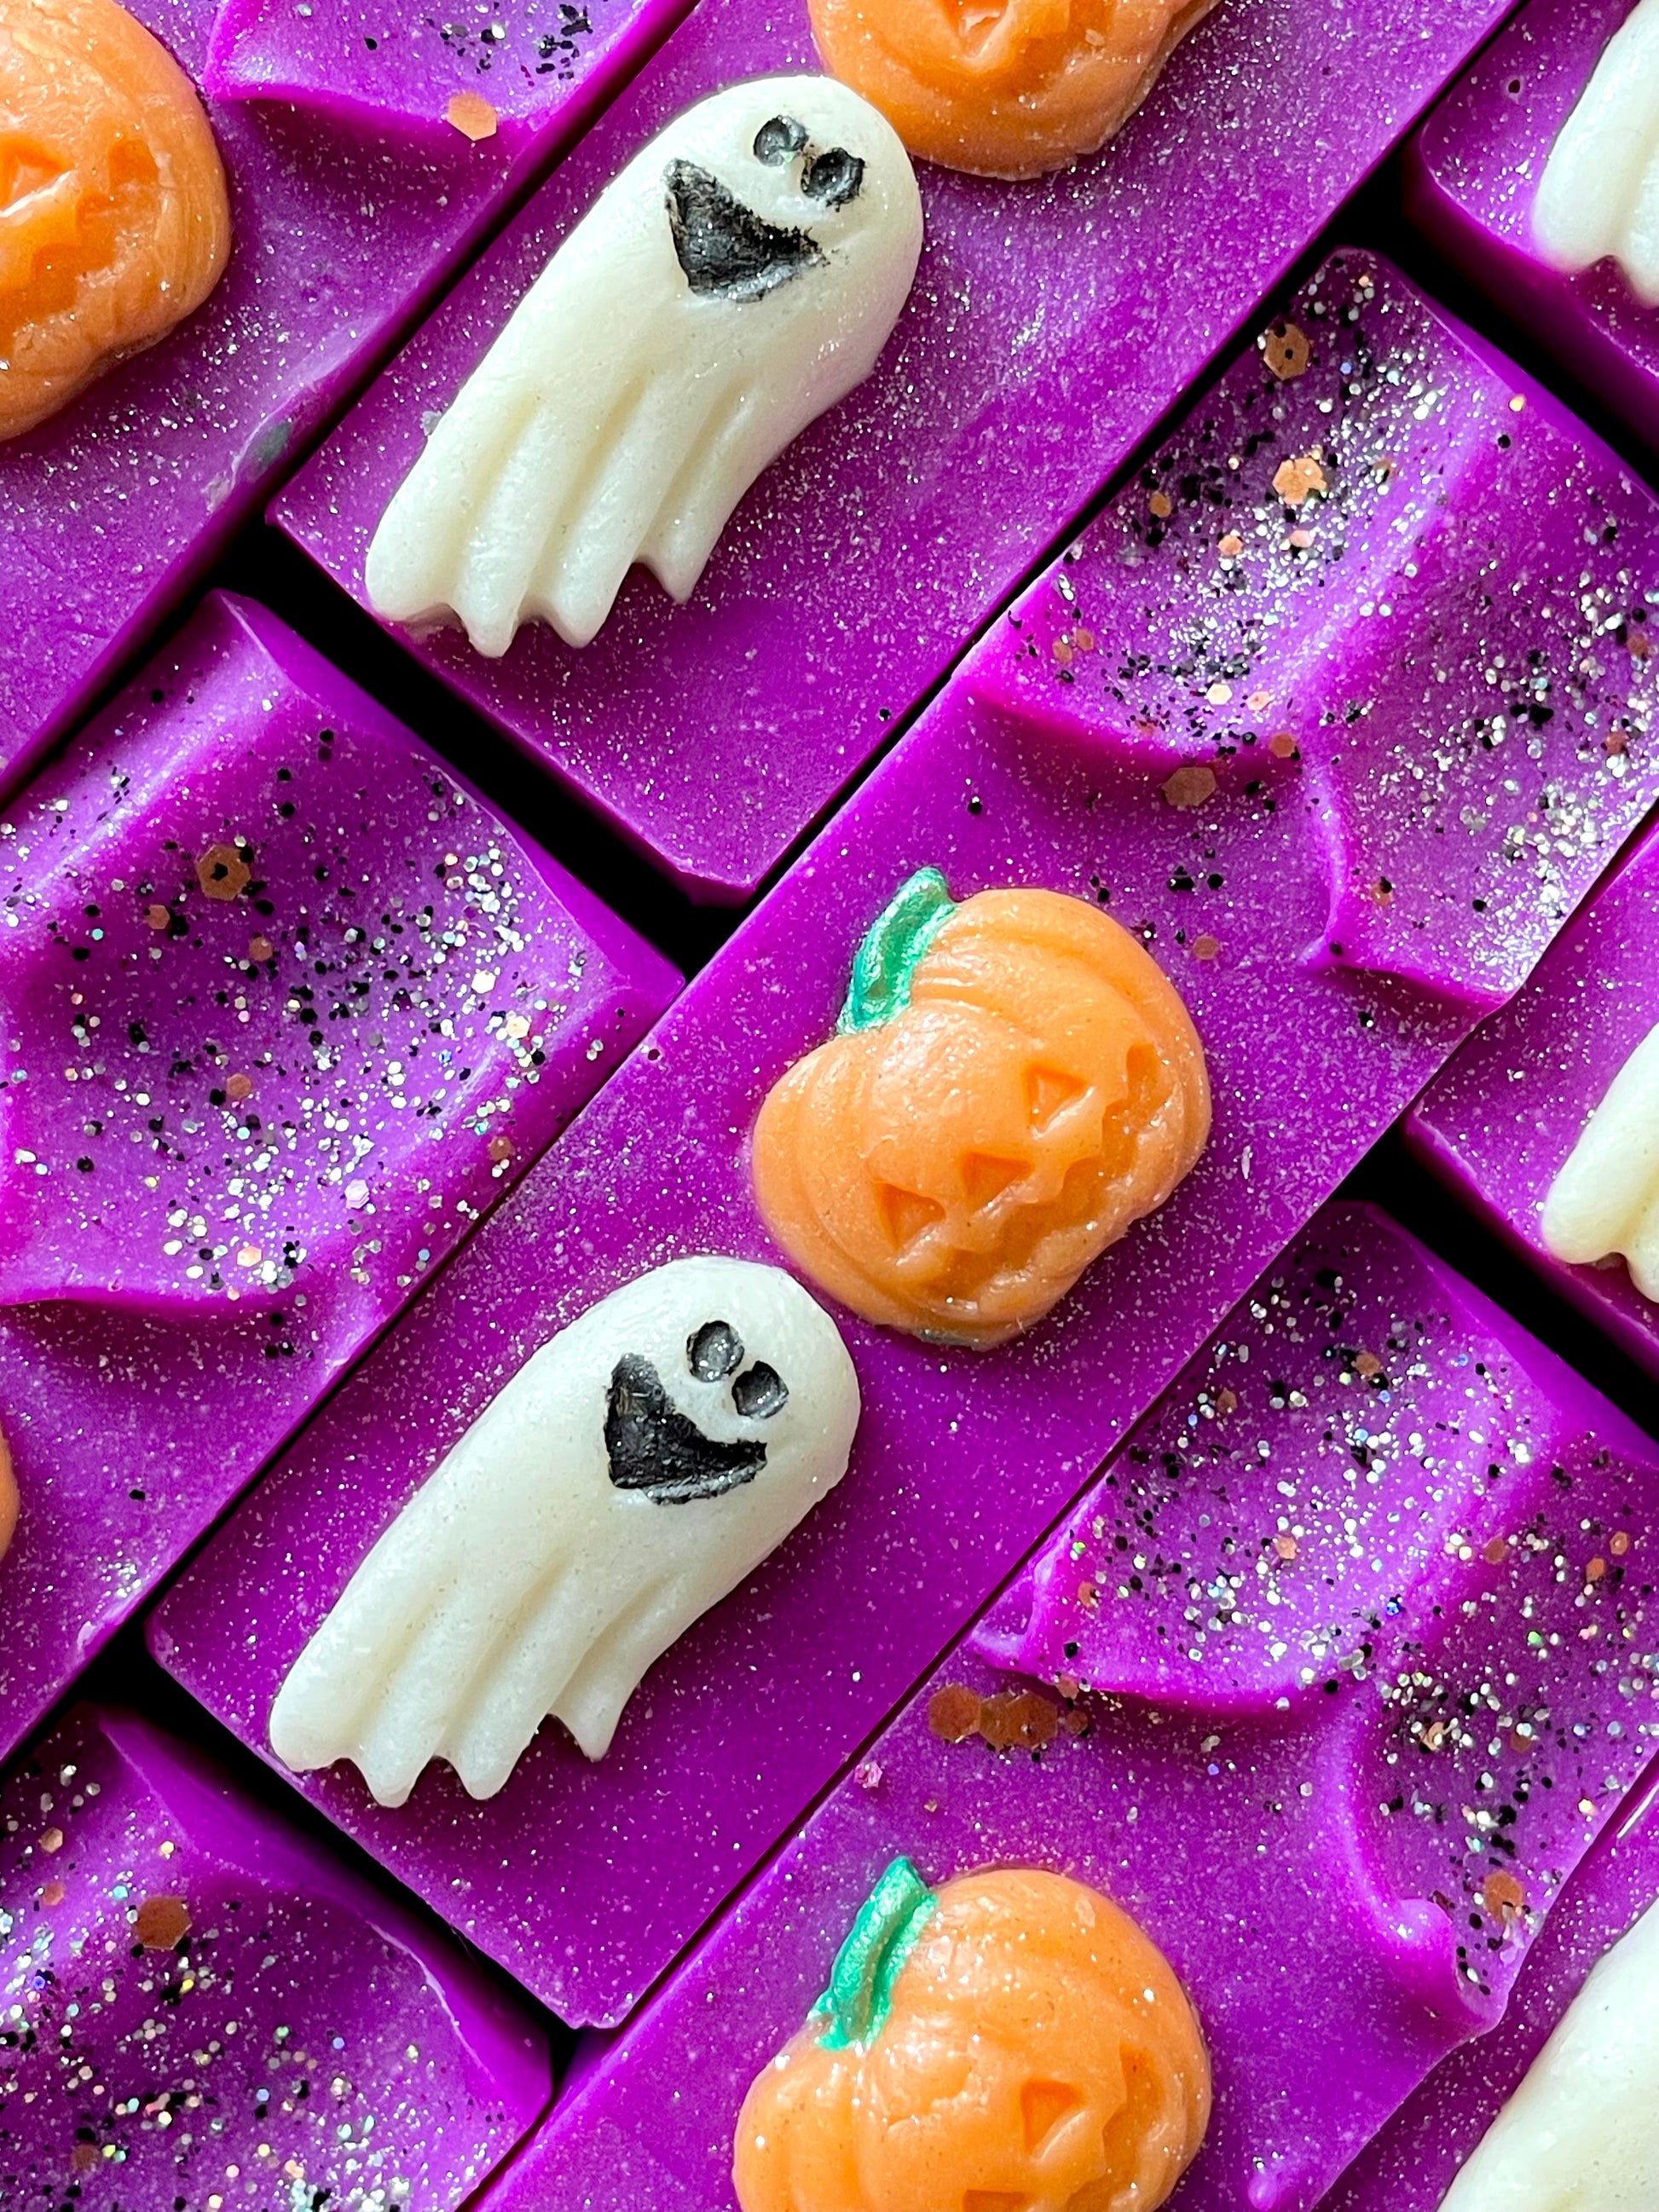 The tops of All Hallows' Eve bar soaps. Each soap has a pumpkin and ghost soap dough embed.  